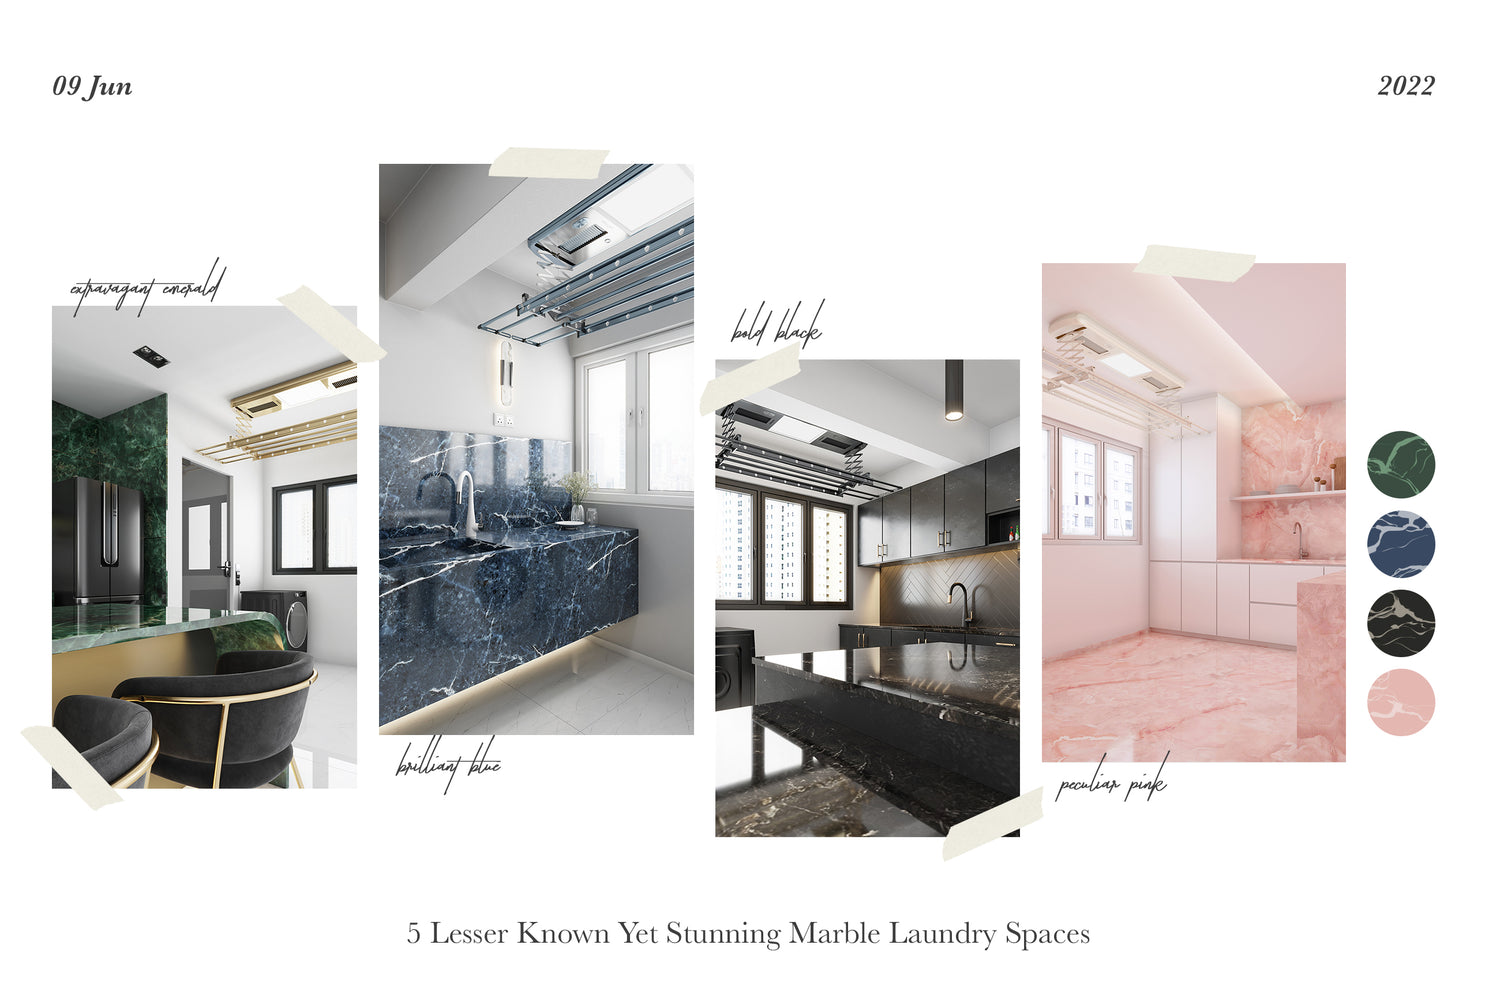 5 Lesser Known Yet Stunning Marble Laundry Spaces